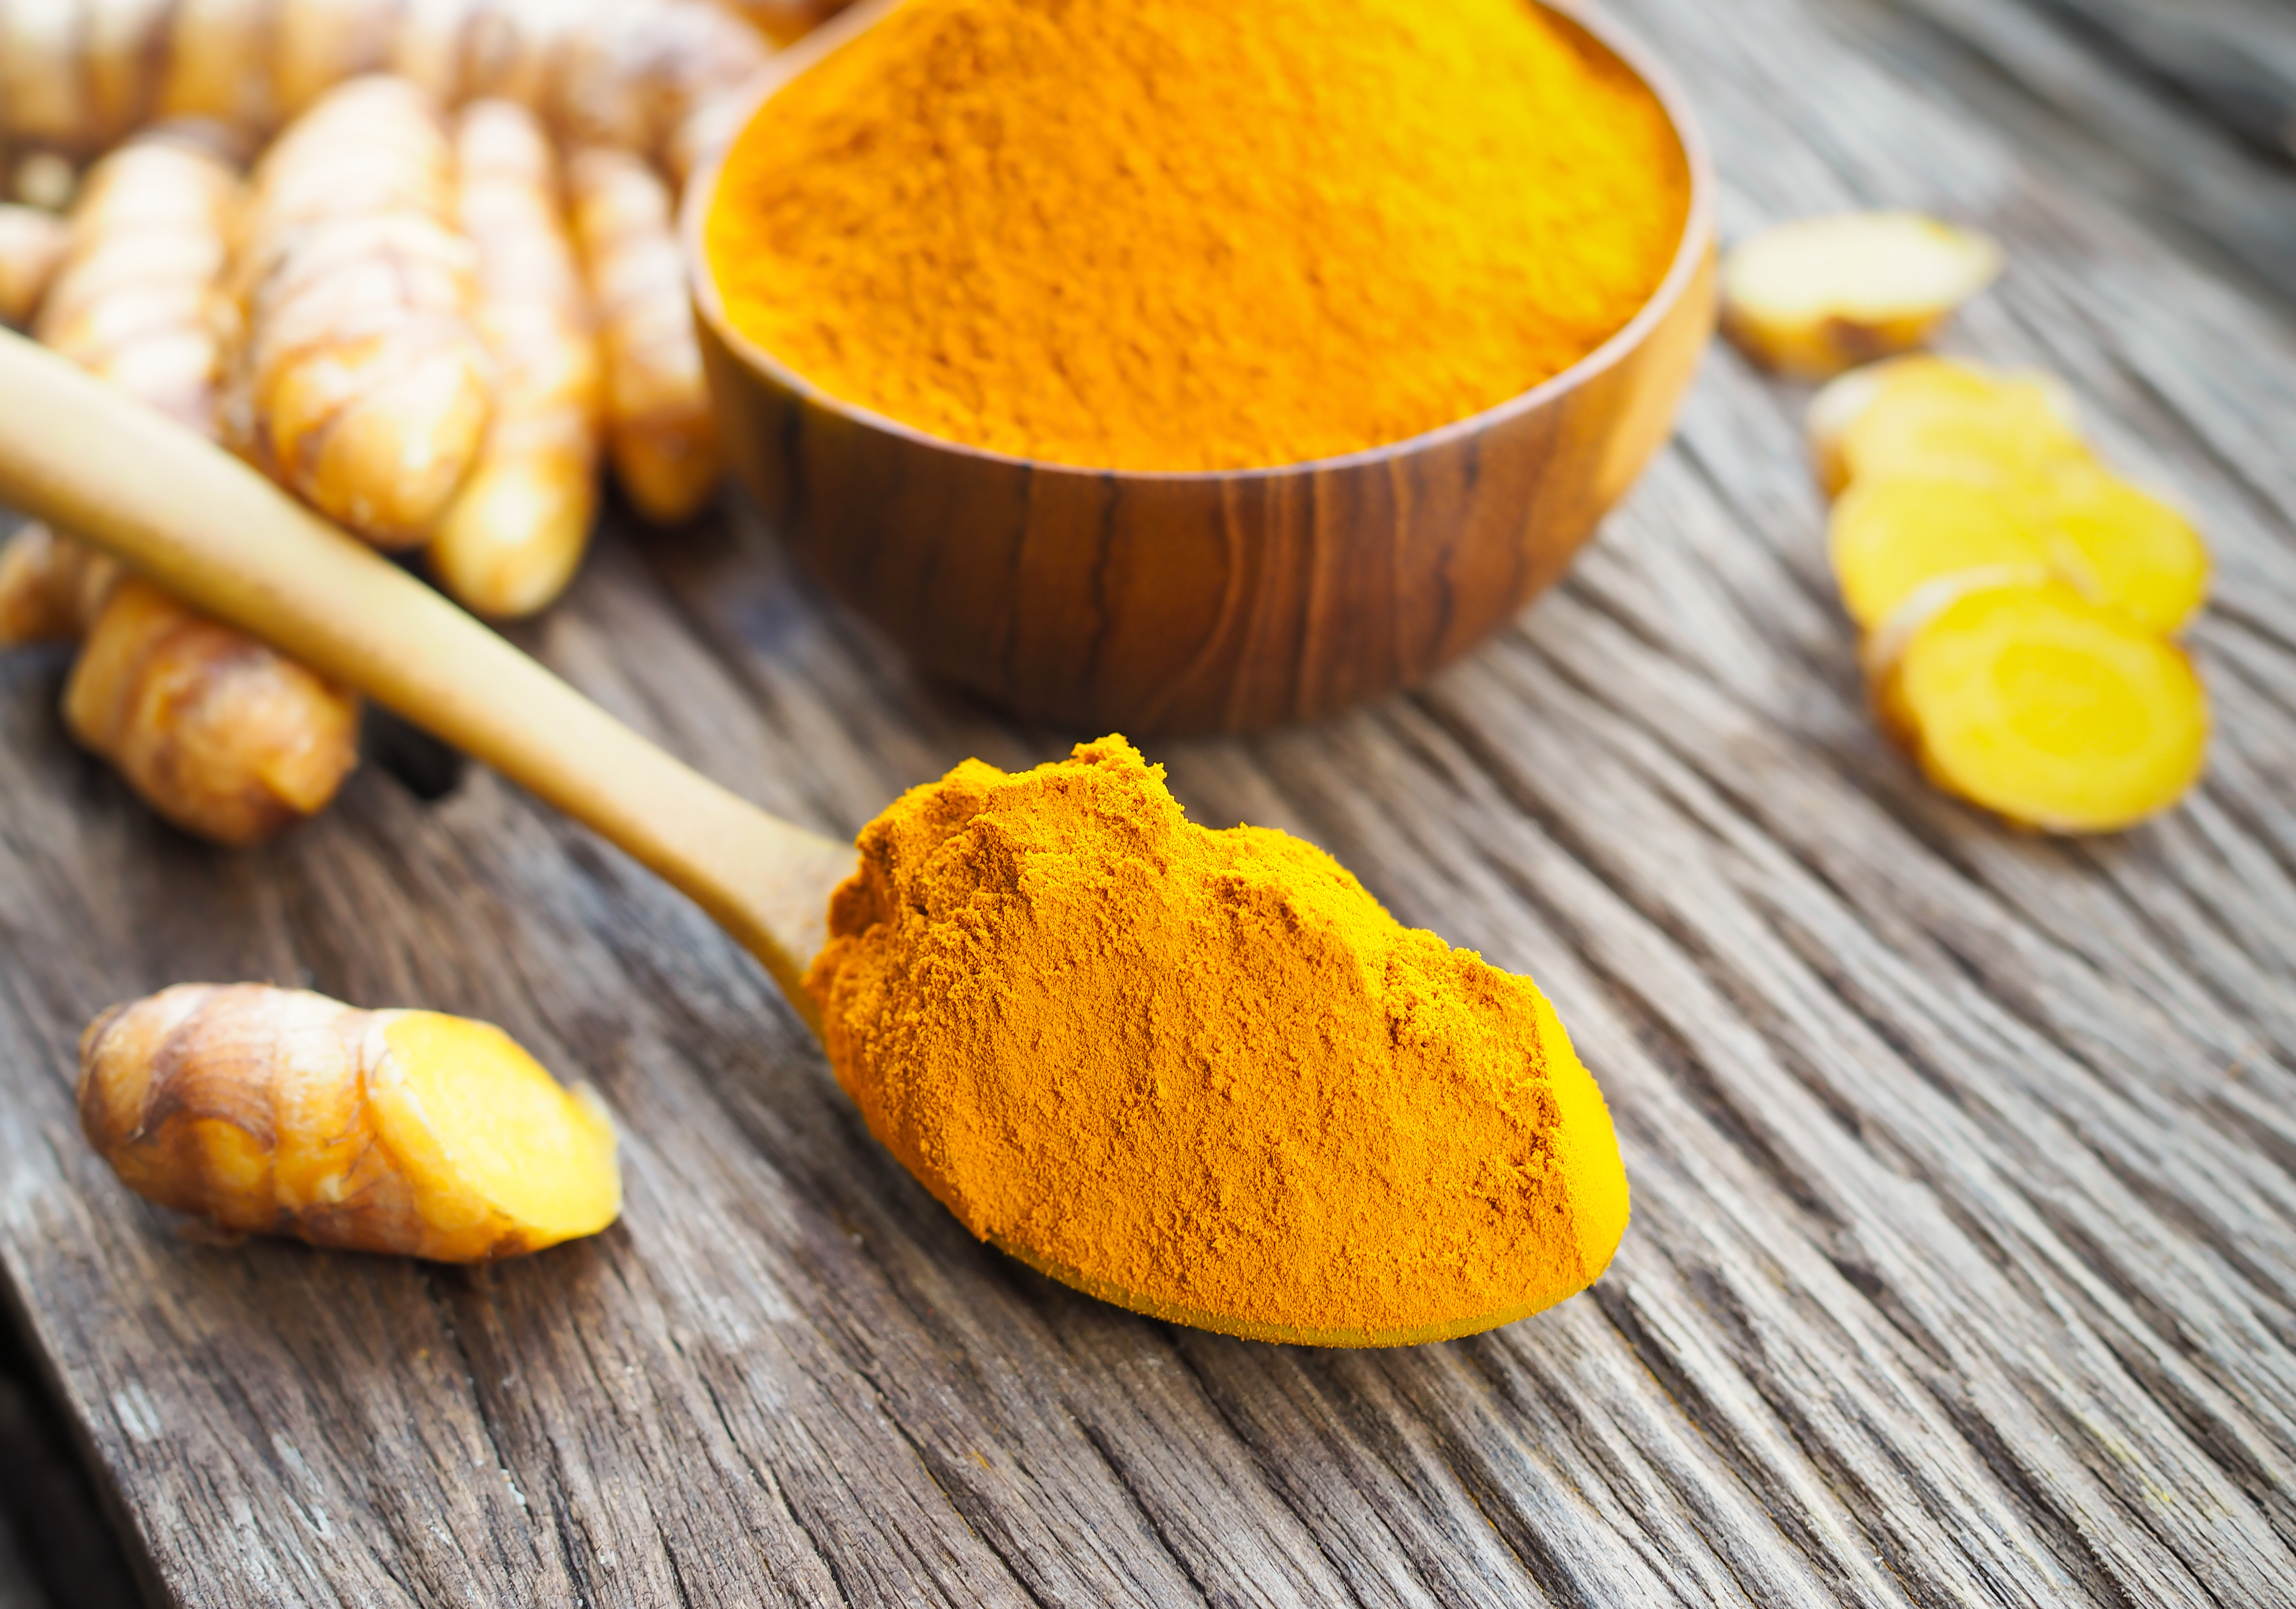 Turmeric: Benefits, Uses, Side Effects, and More